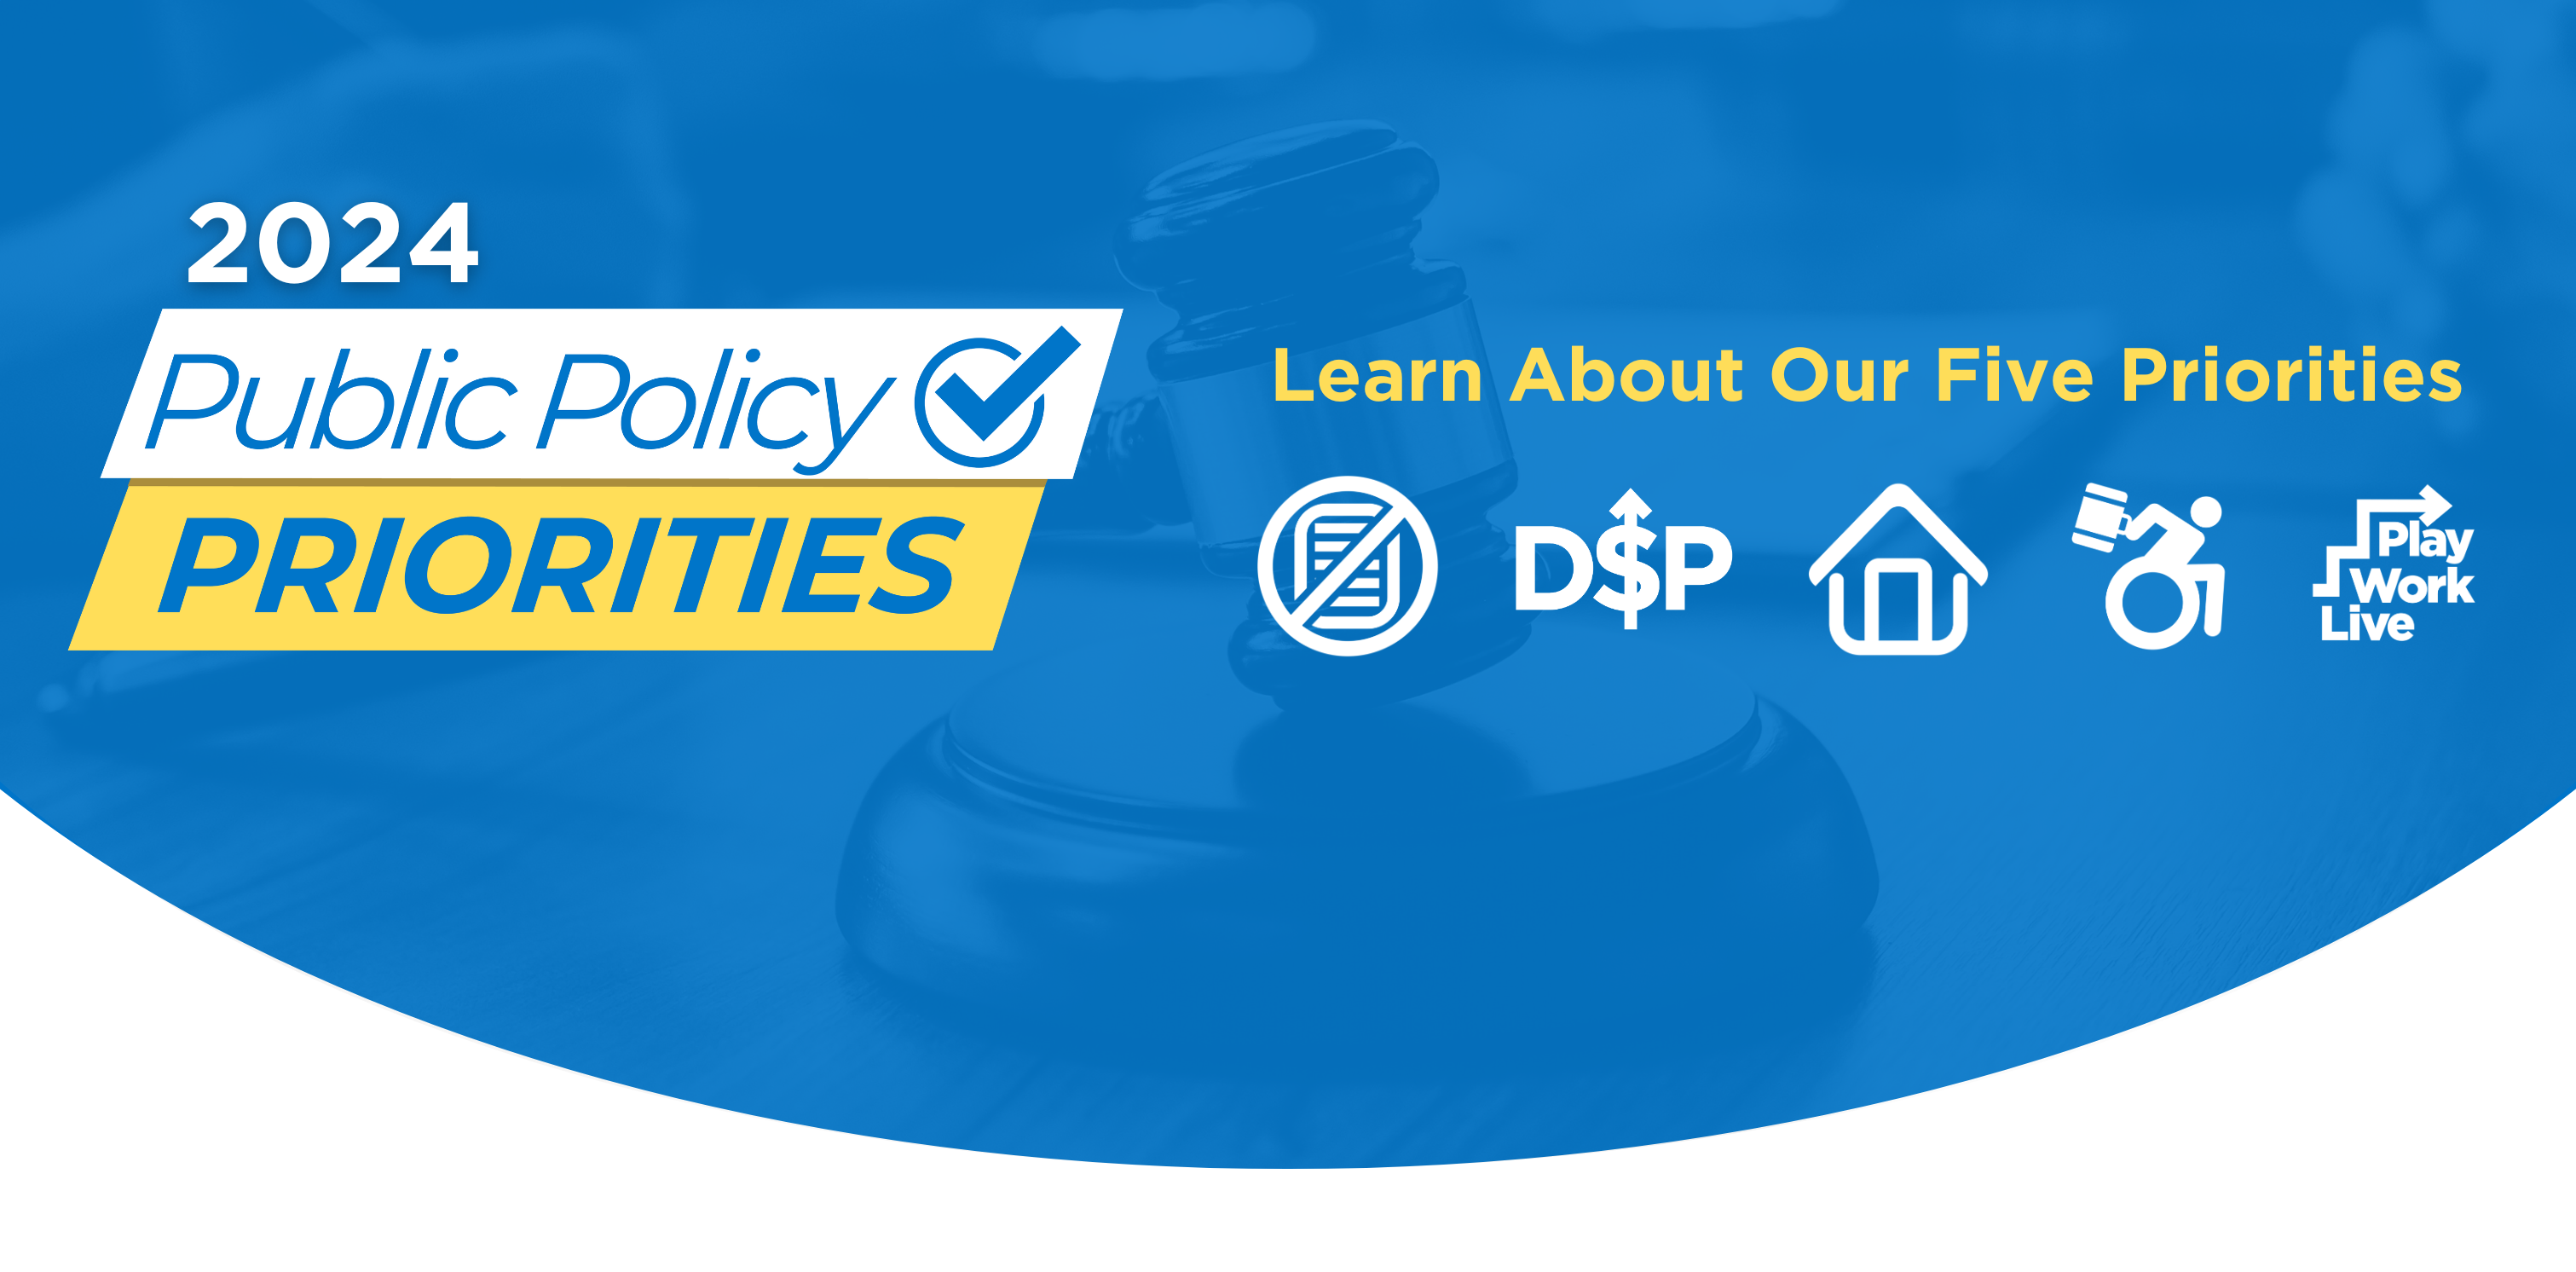 Learn About Our Five Public Policy Priorities!